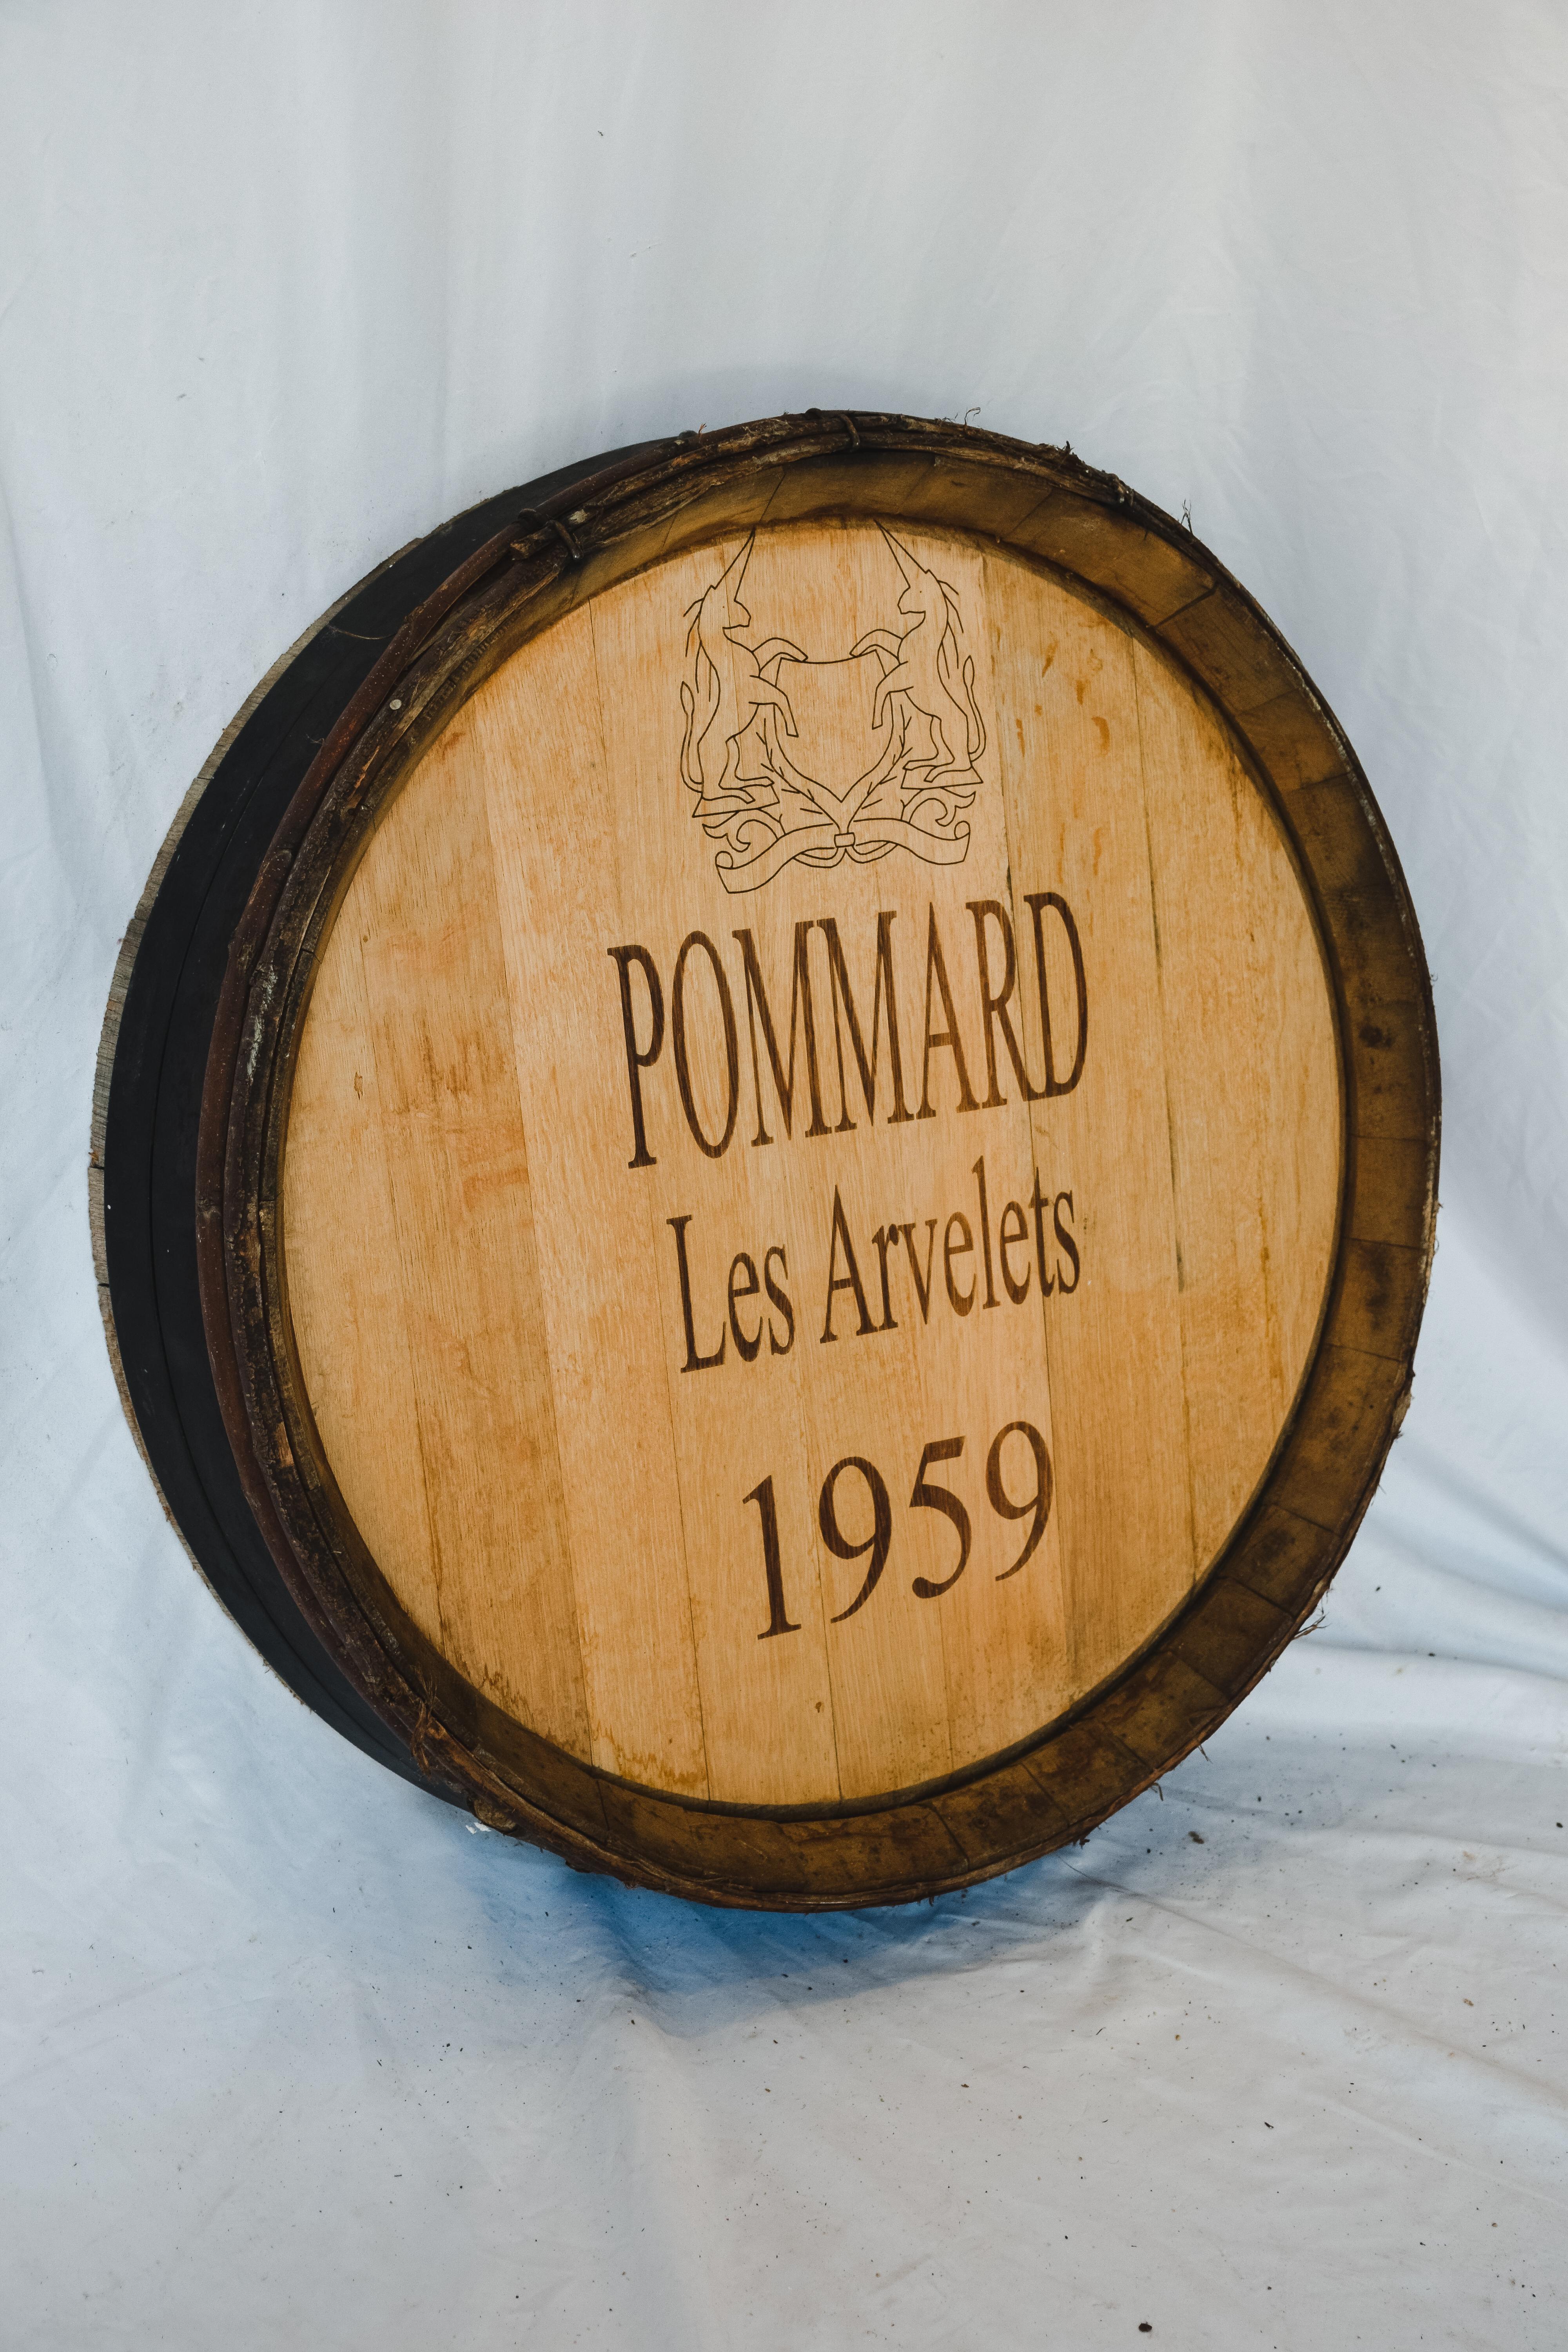 This Antique Wine Barrel Façade comes out of the wine cellars in France. The character and aged wood give it perfect presentation to hang in your wine room or any living space. The Pommard Les Arvelets 1959 custom stamp was added at a later date.